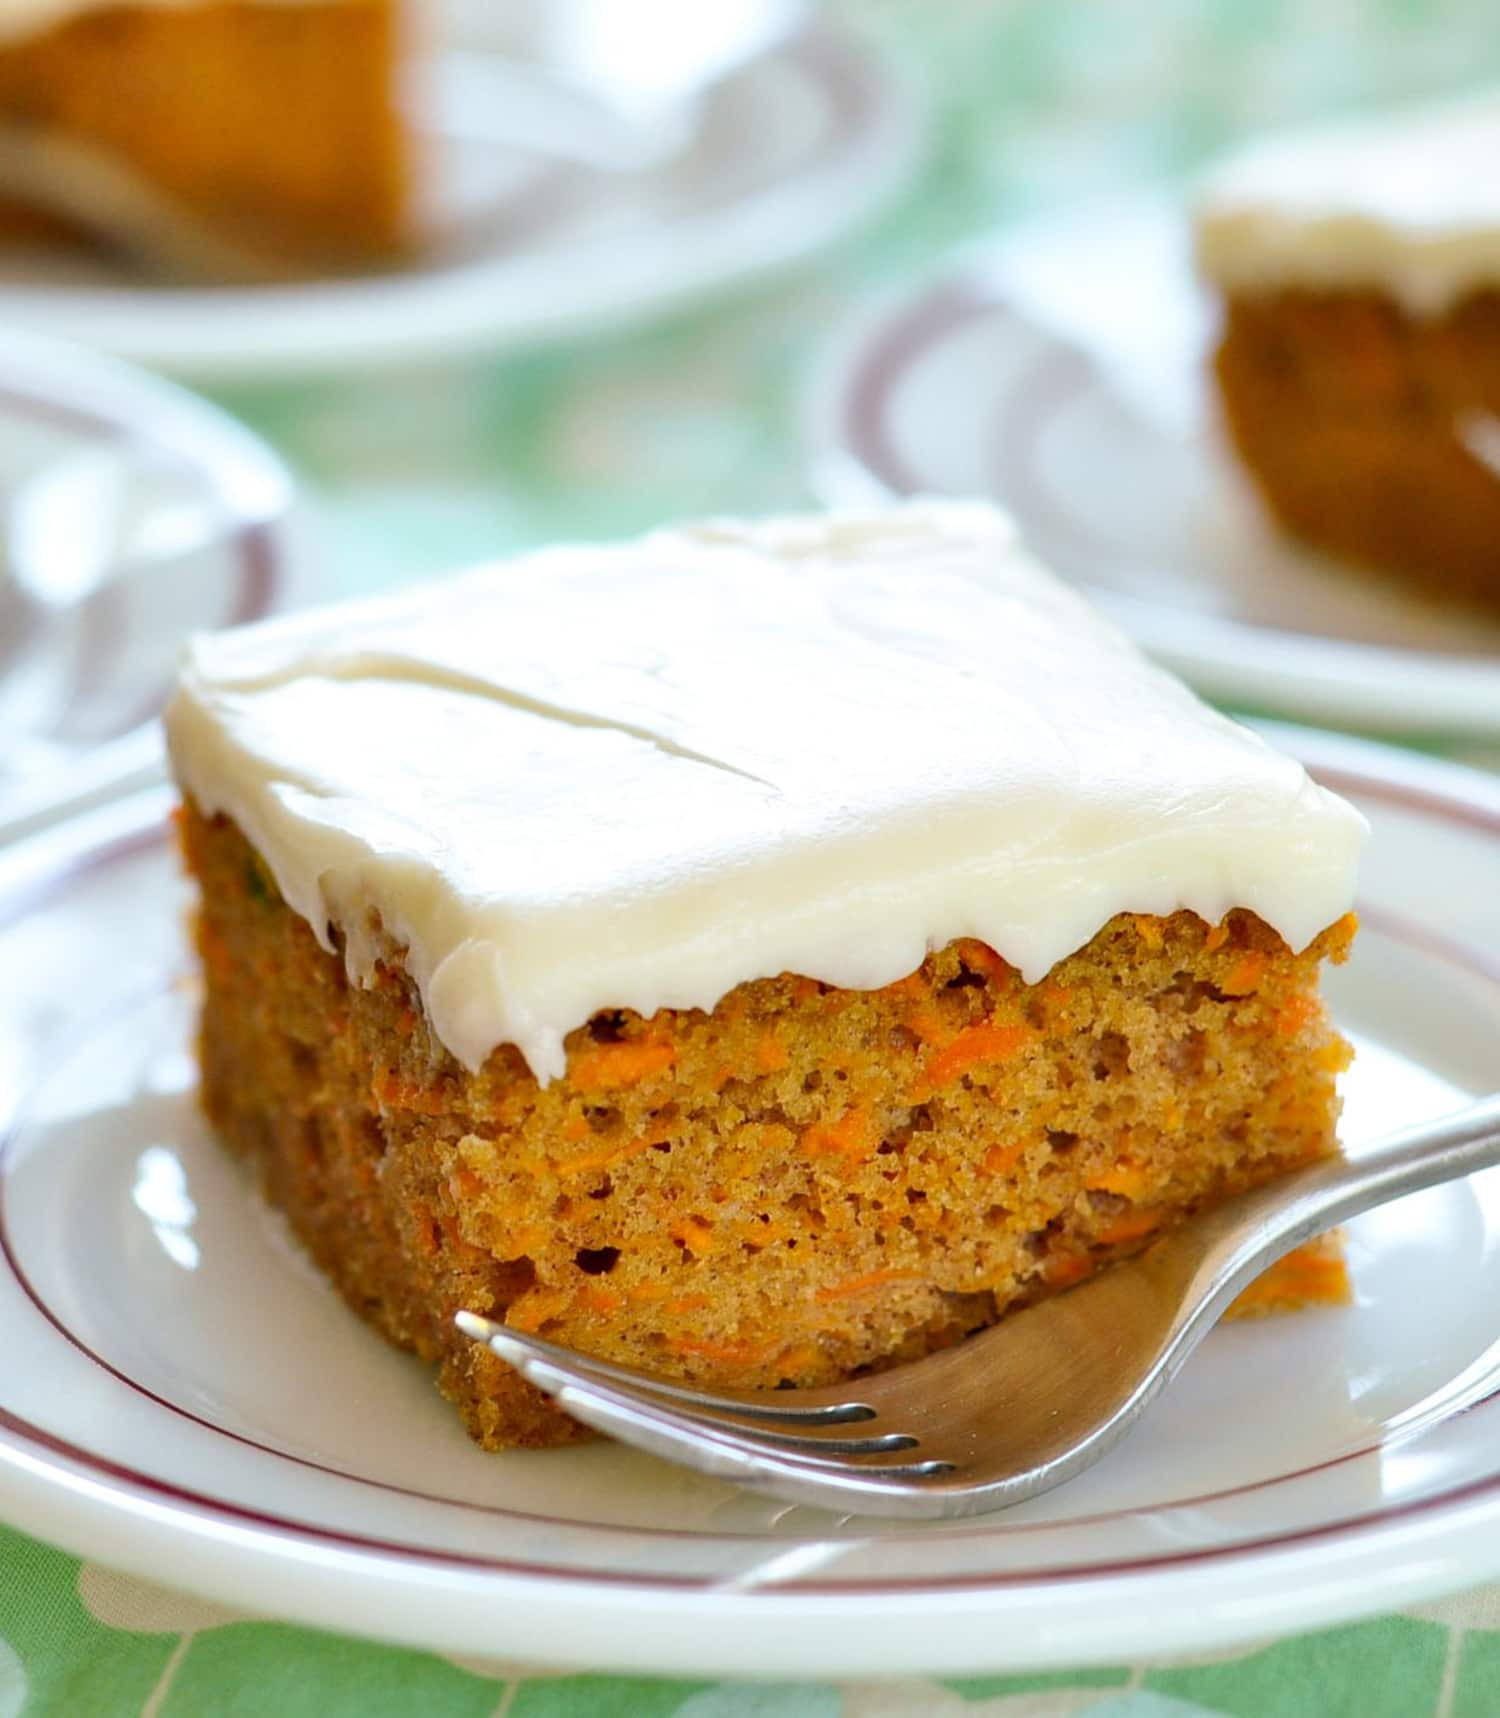 Cream Cheese Frosting Recipe for Carrot Cake Awesome Recipe Carrot Cake with Cream Cheese Frosting